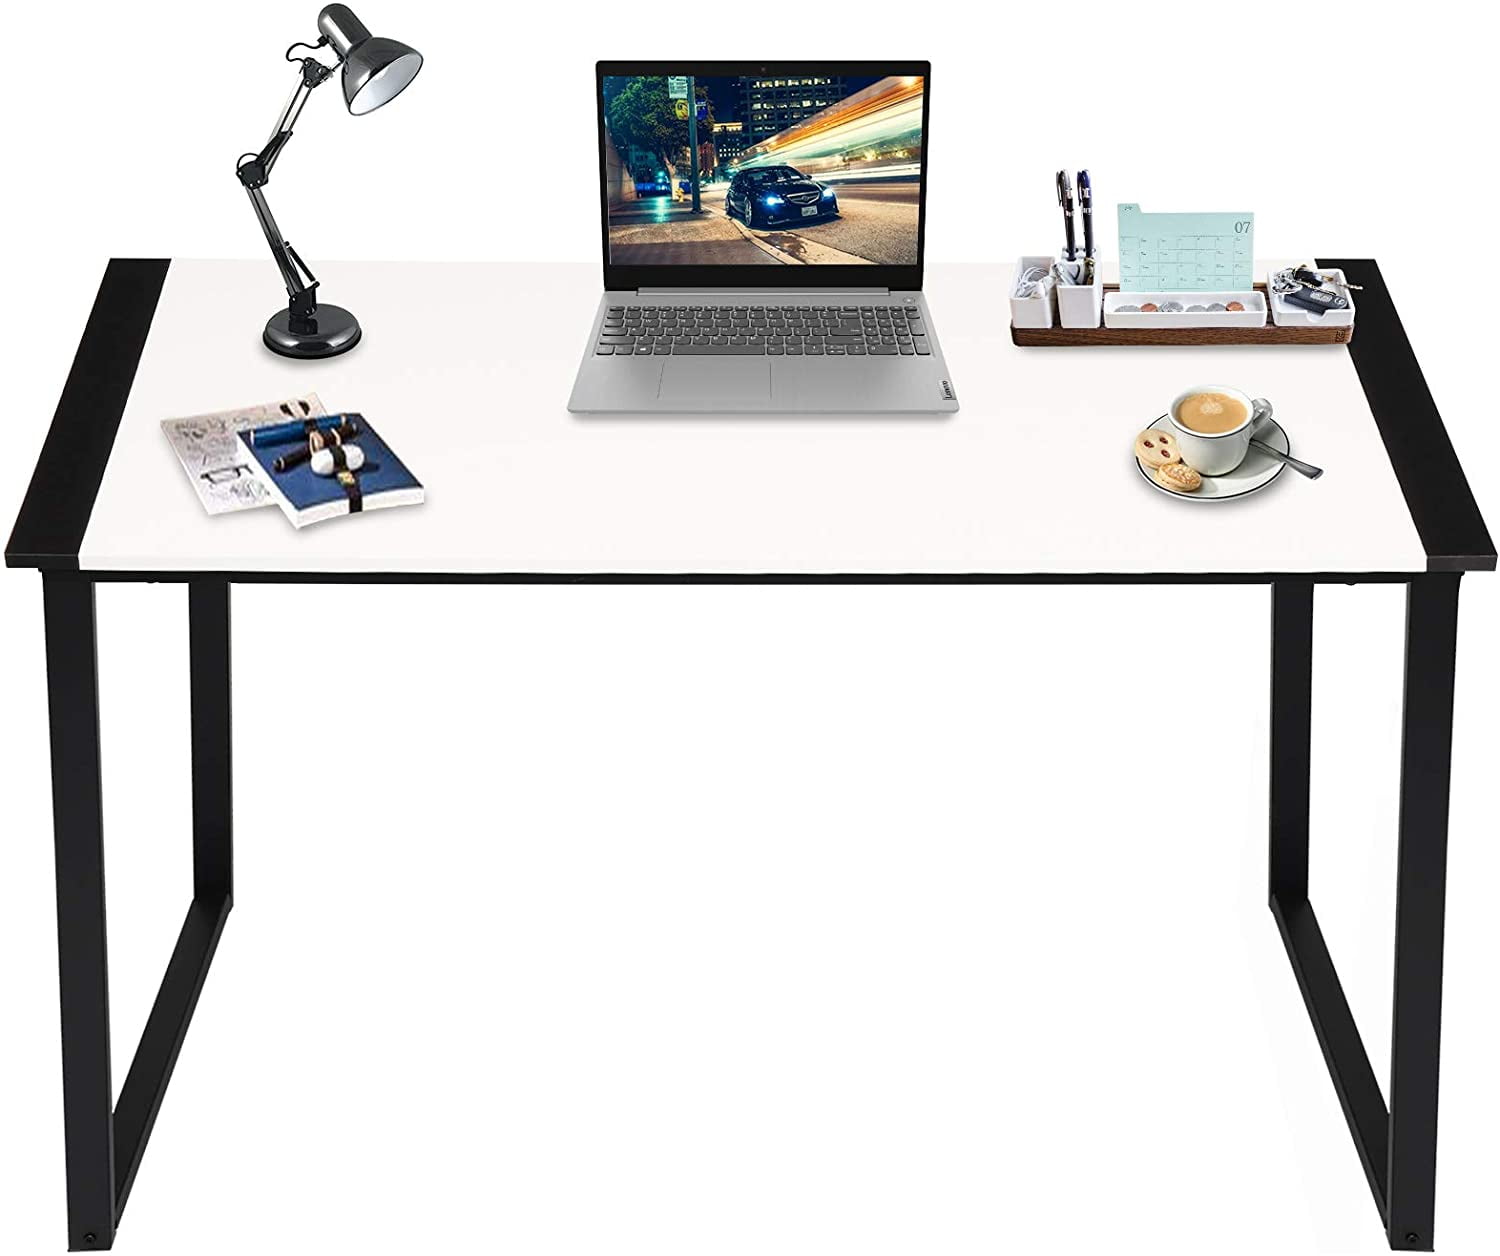 IRIS USA 47 Inch Modern Laptop and Computer Desk Office Table for Home Office Water and Scratch Resistant Surface Gaming Desk Easy to Assemble Black Desk